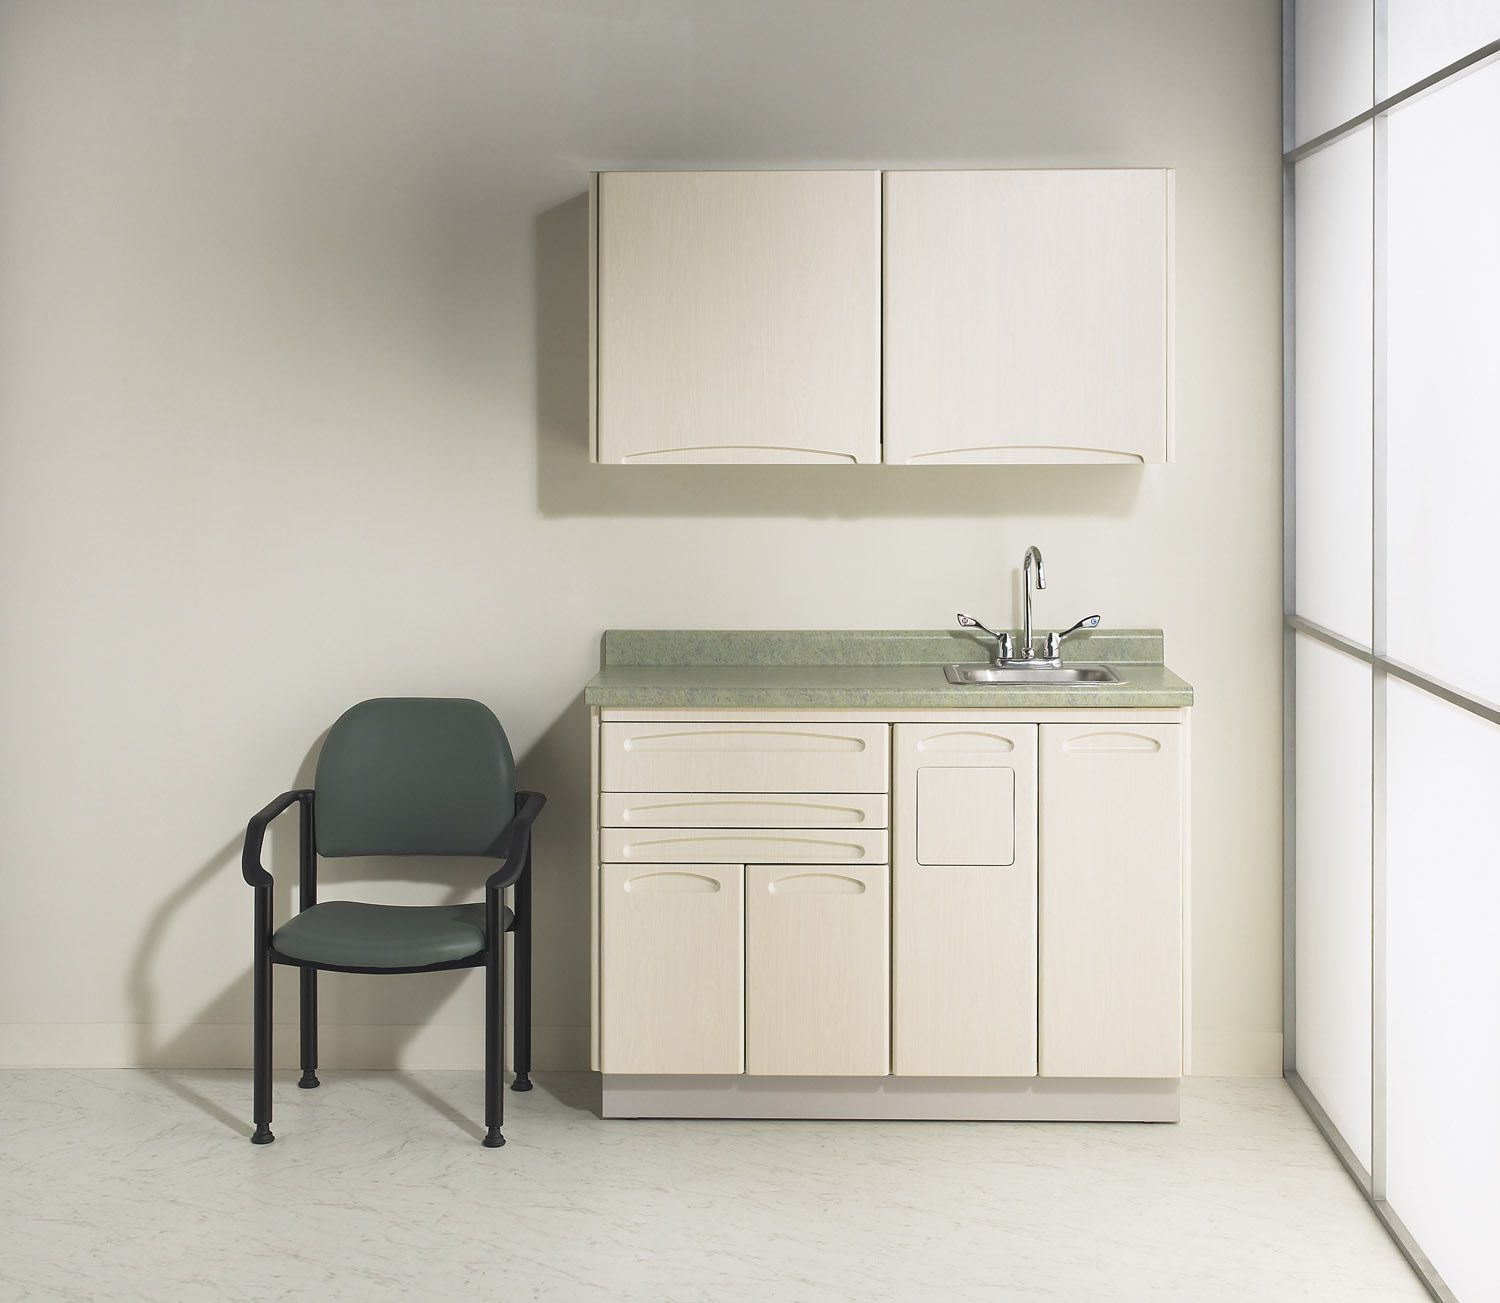 Veterinary clinic worktop / with drawer / with storage unit / with sink Midmark Best Midmark Animal Health